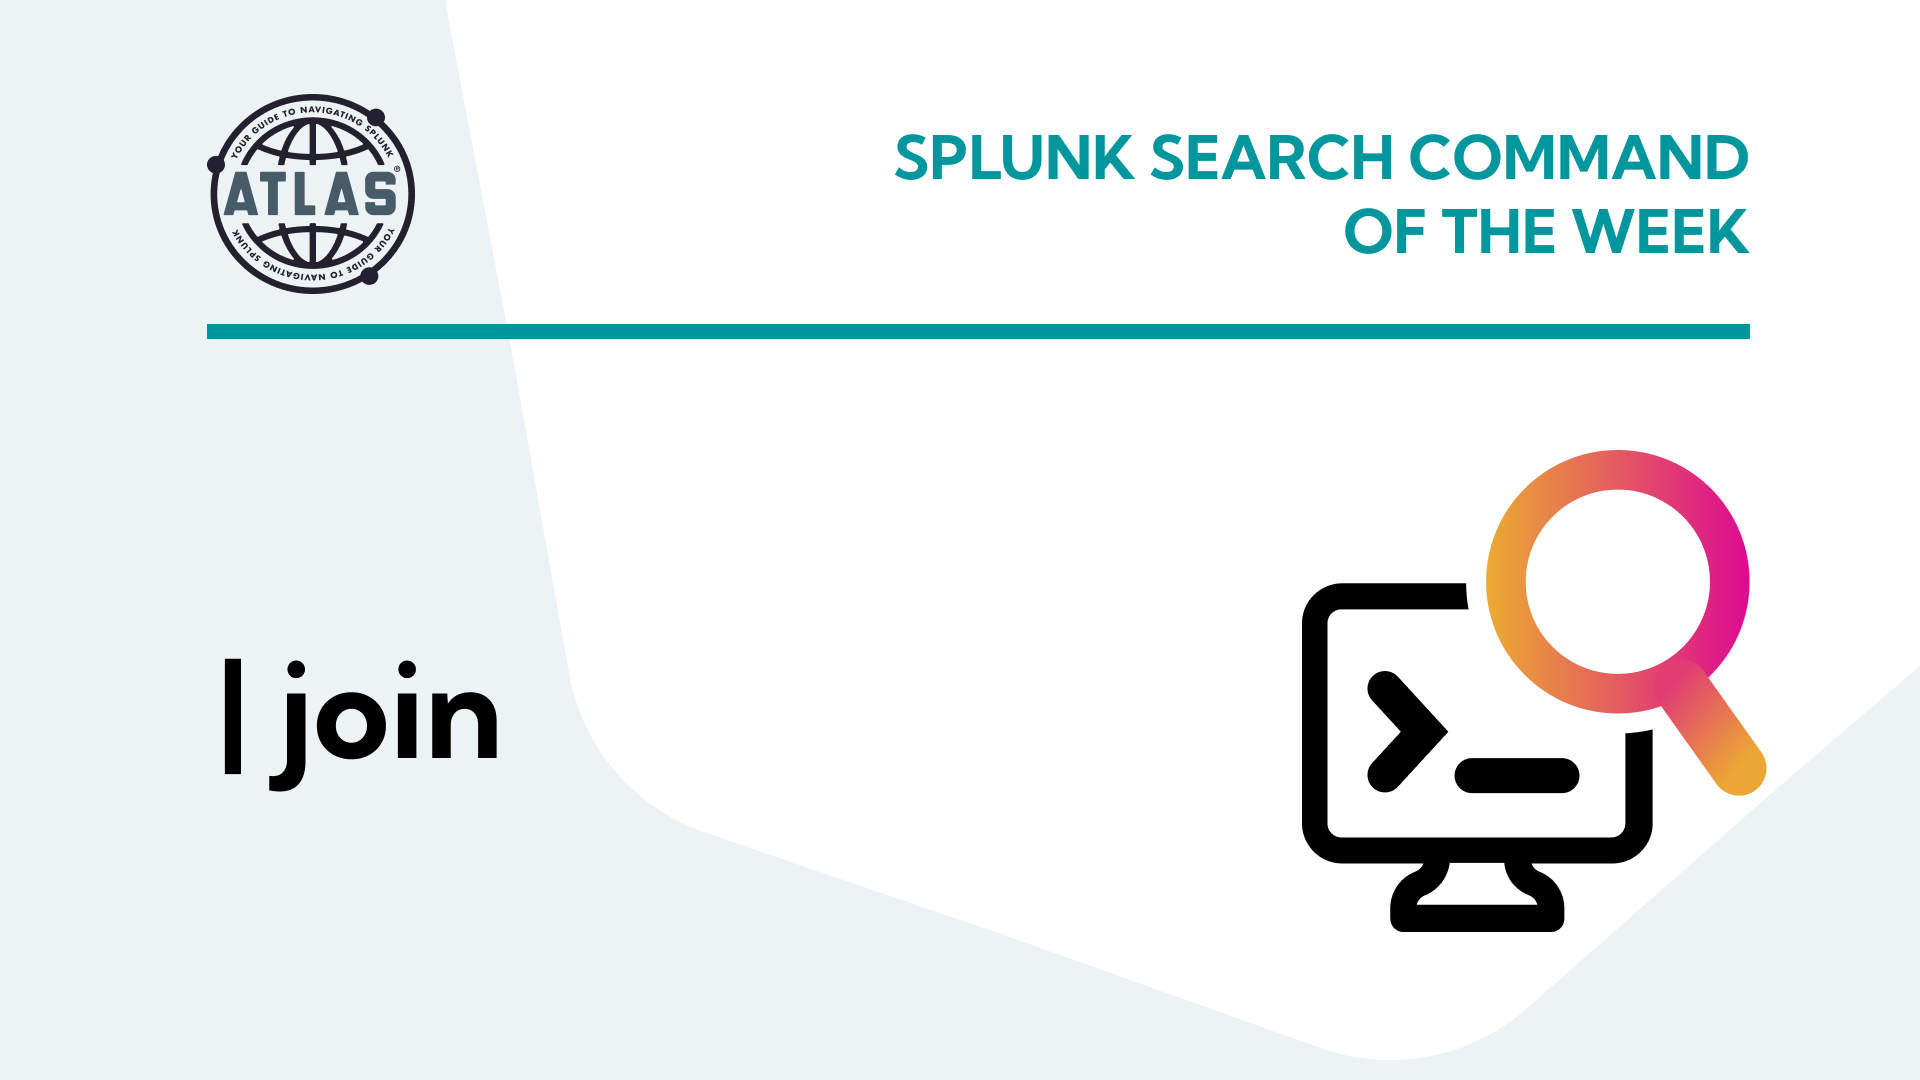 Splunk Search Command Of The Week: join